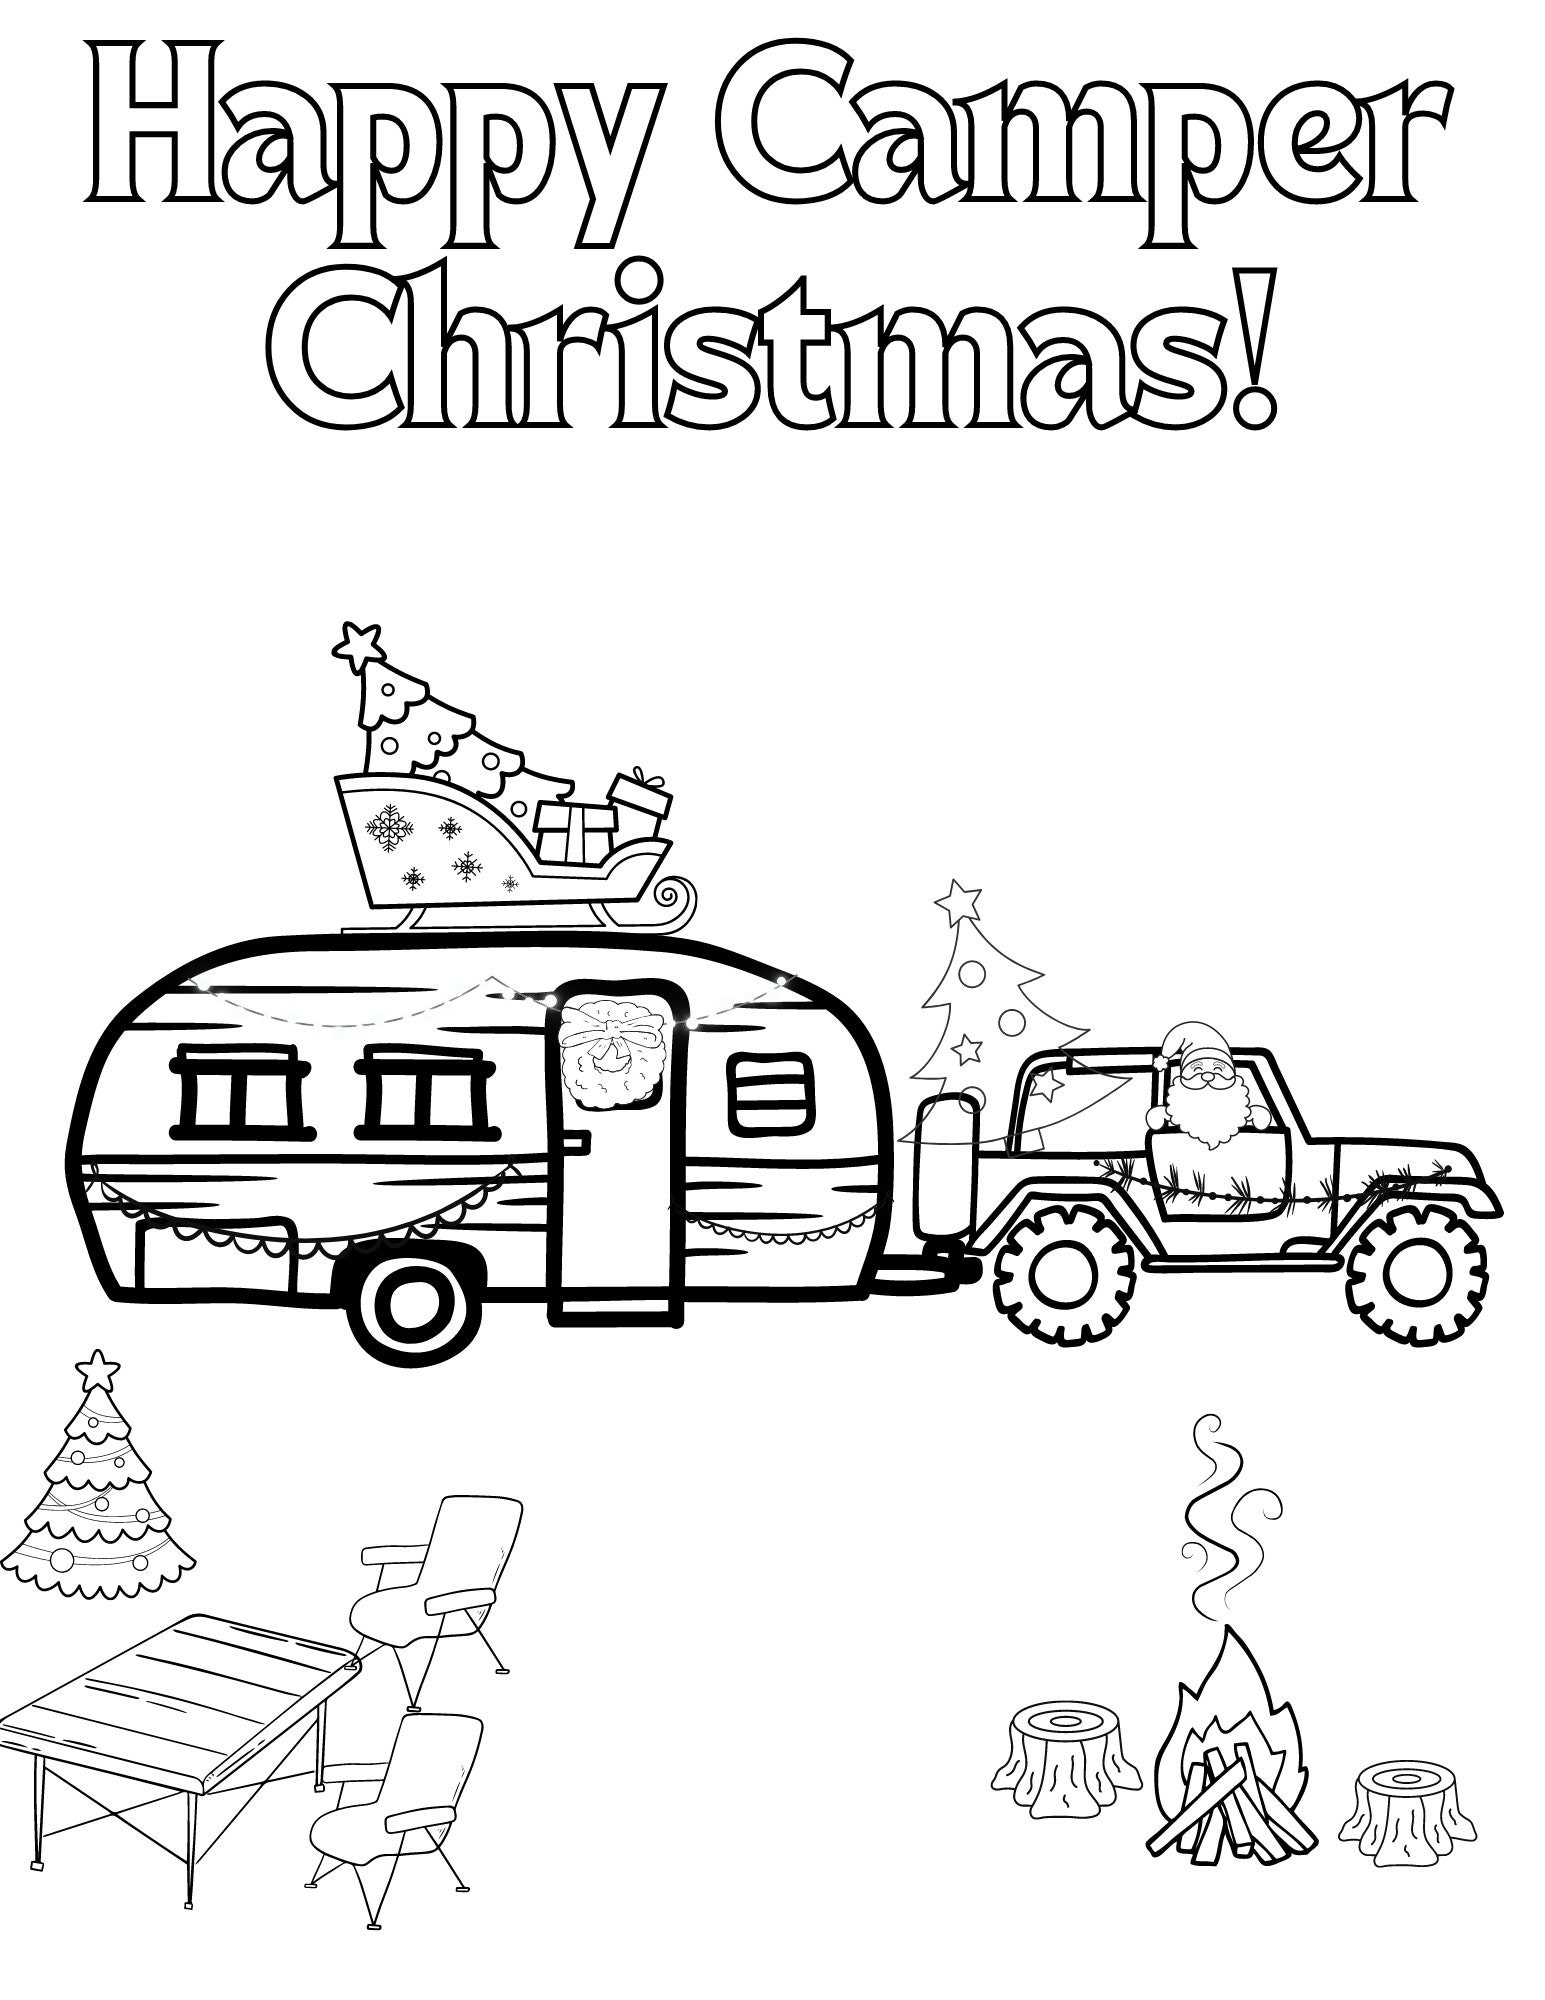 Happy camper christmas coloring page